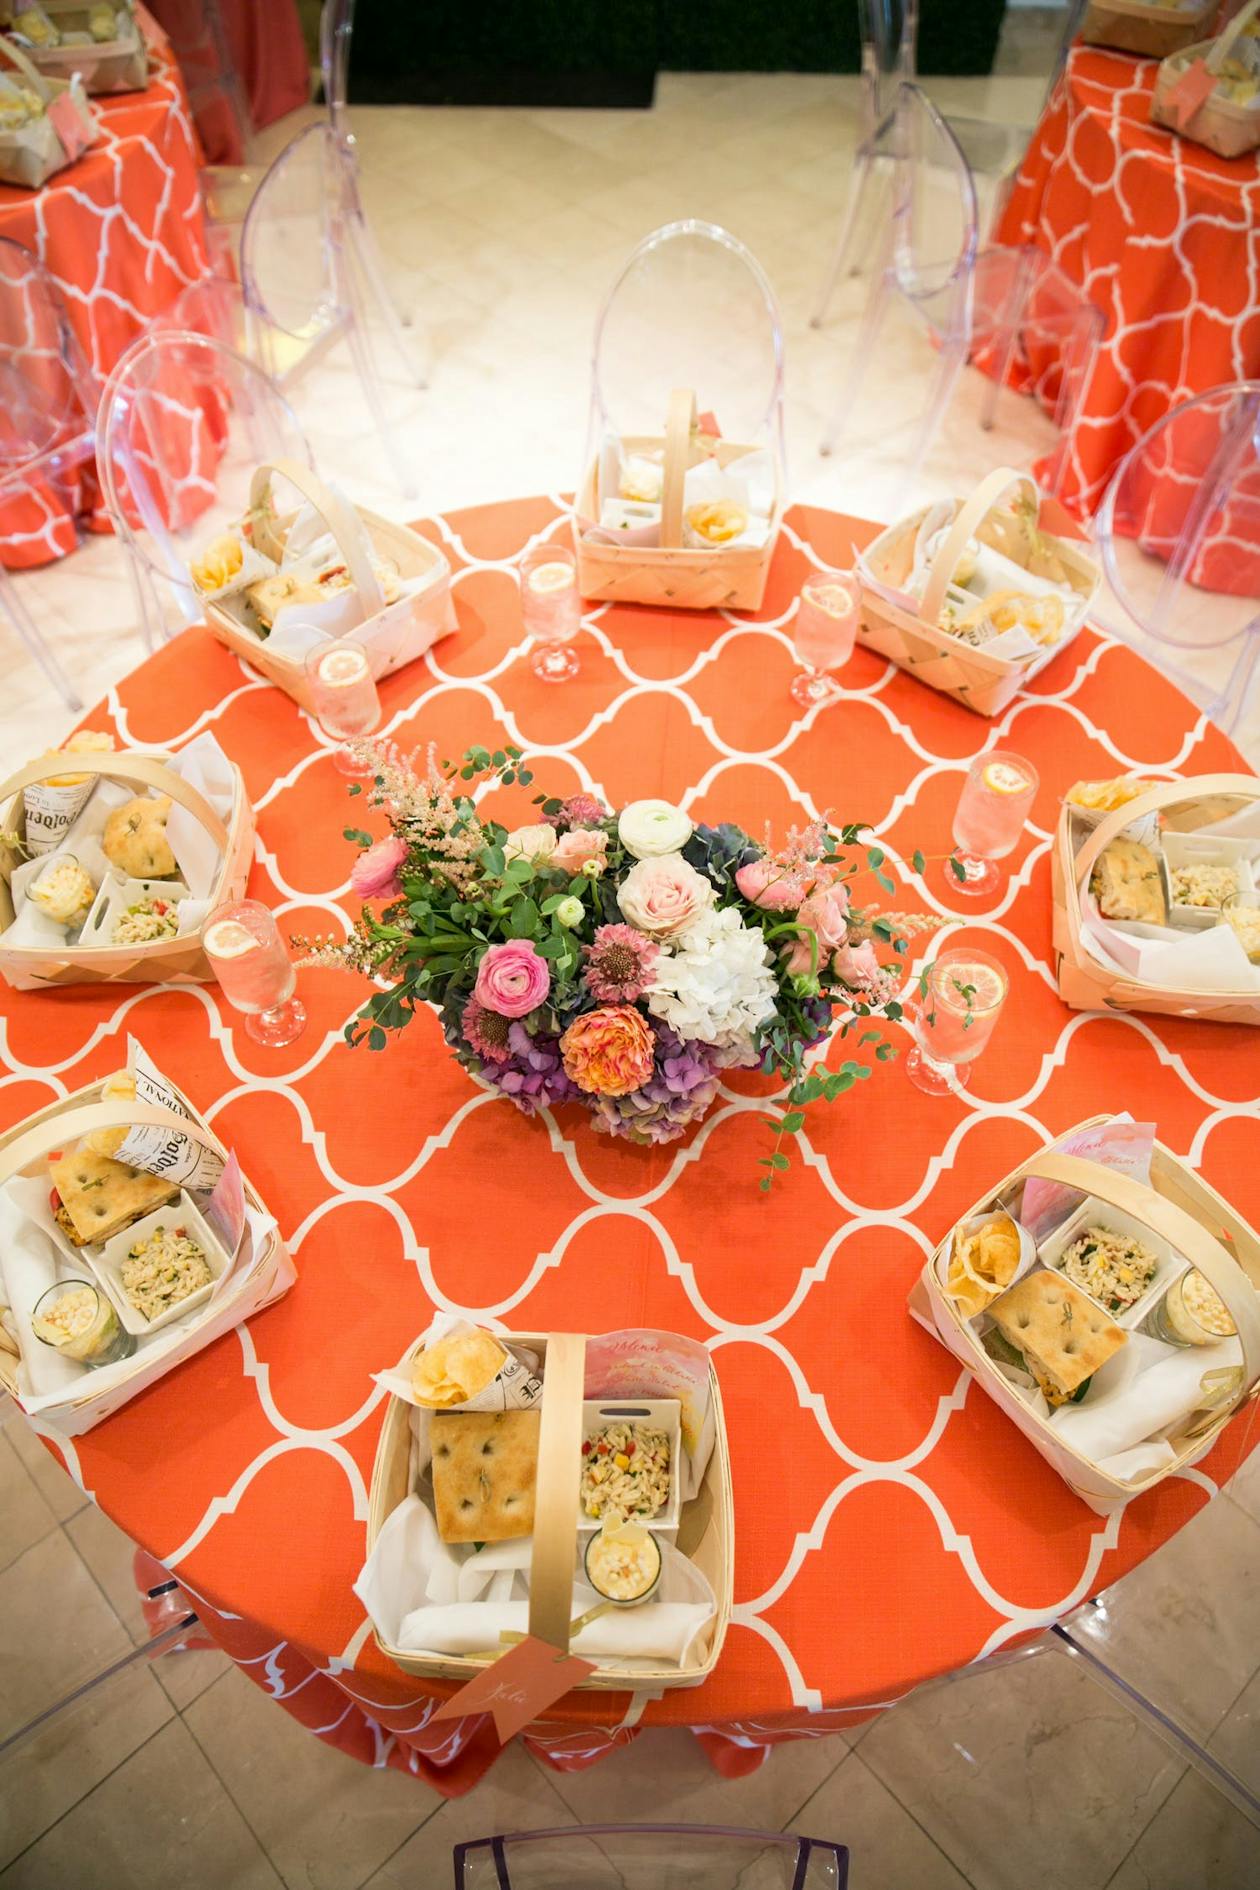 Painting Party With Vibrant Colors and Orange Table Cloth with Picnic Baskets On Top | PartySlate